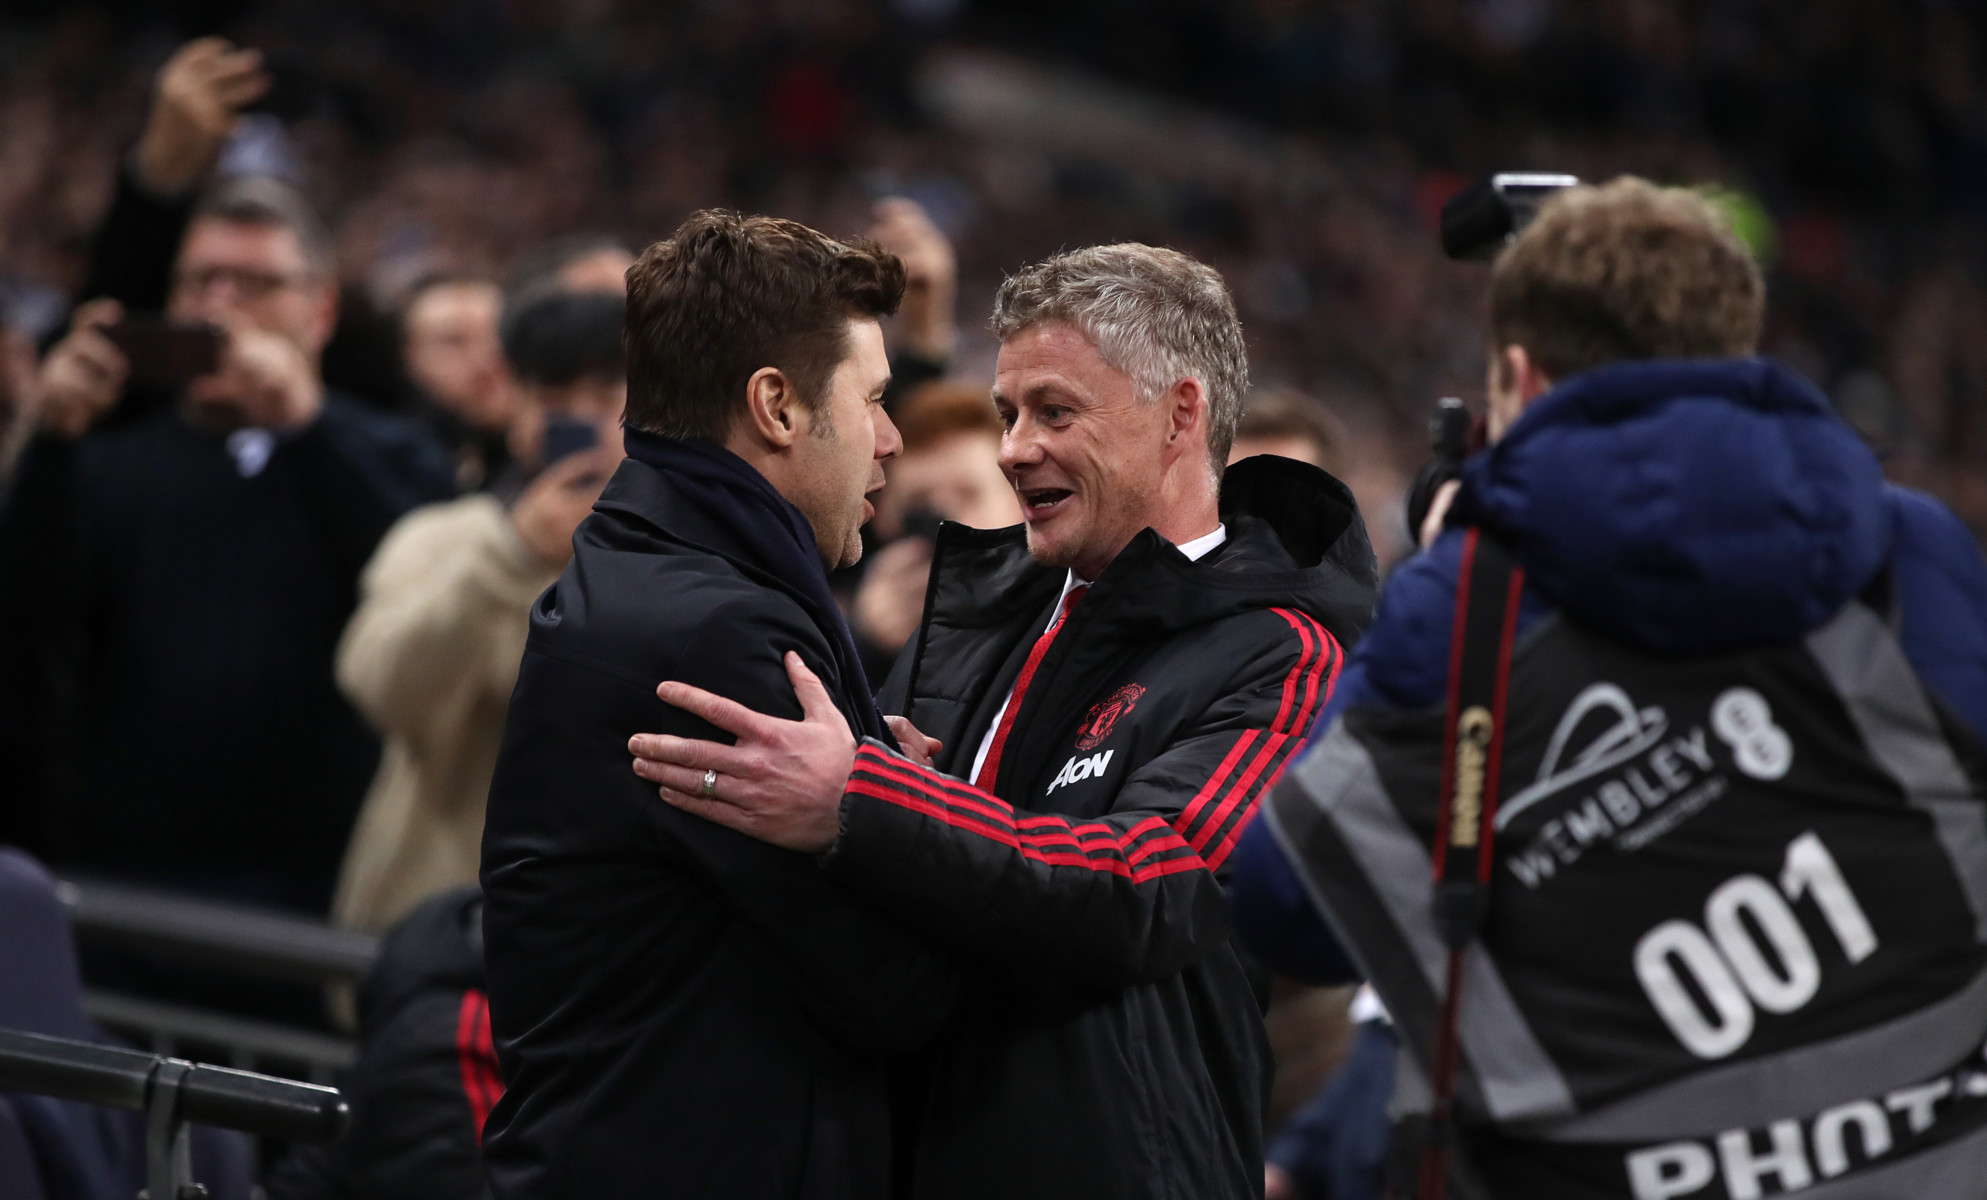 Mauricio Pochettino is now rated a strong contender to boss Newcastle if their takeover gooes ahead, having previously been touted for the Man Utd job Ole Gunnar Solskjaer now has